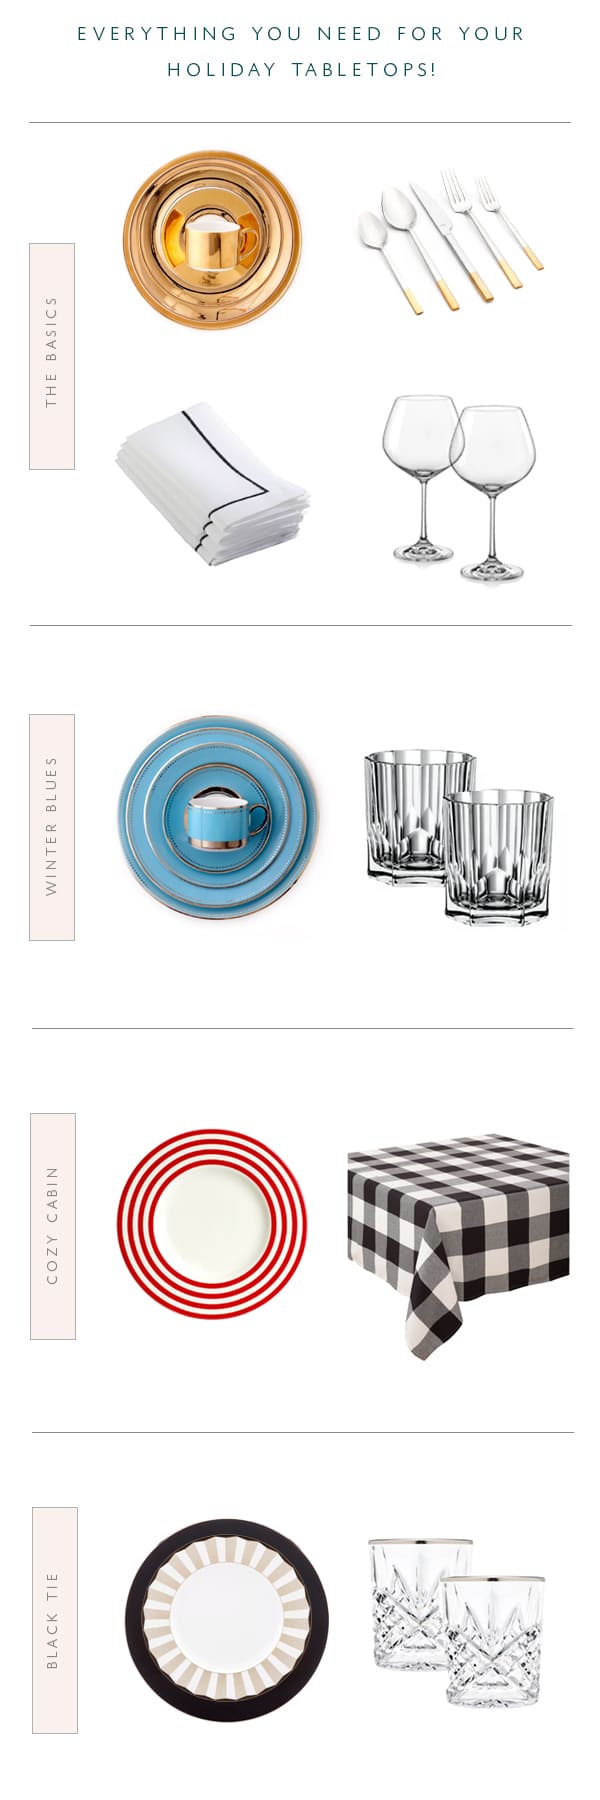 our holiday tabletop must-haves from overstock!